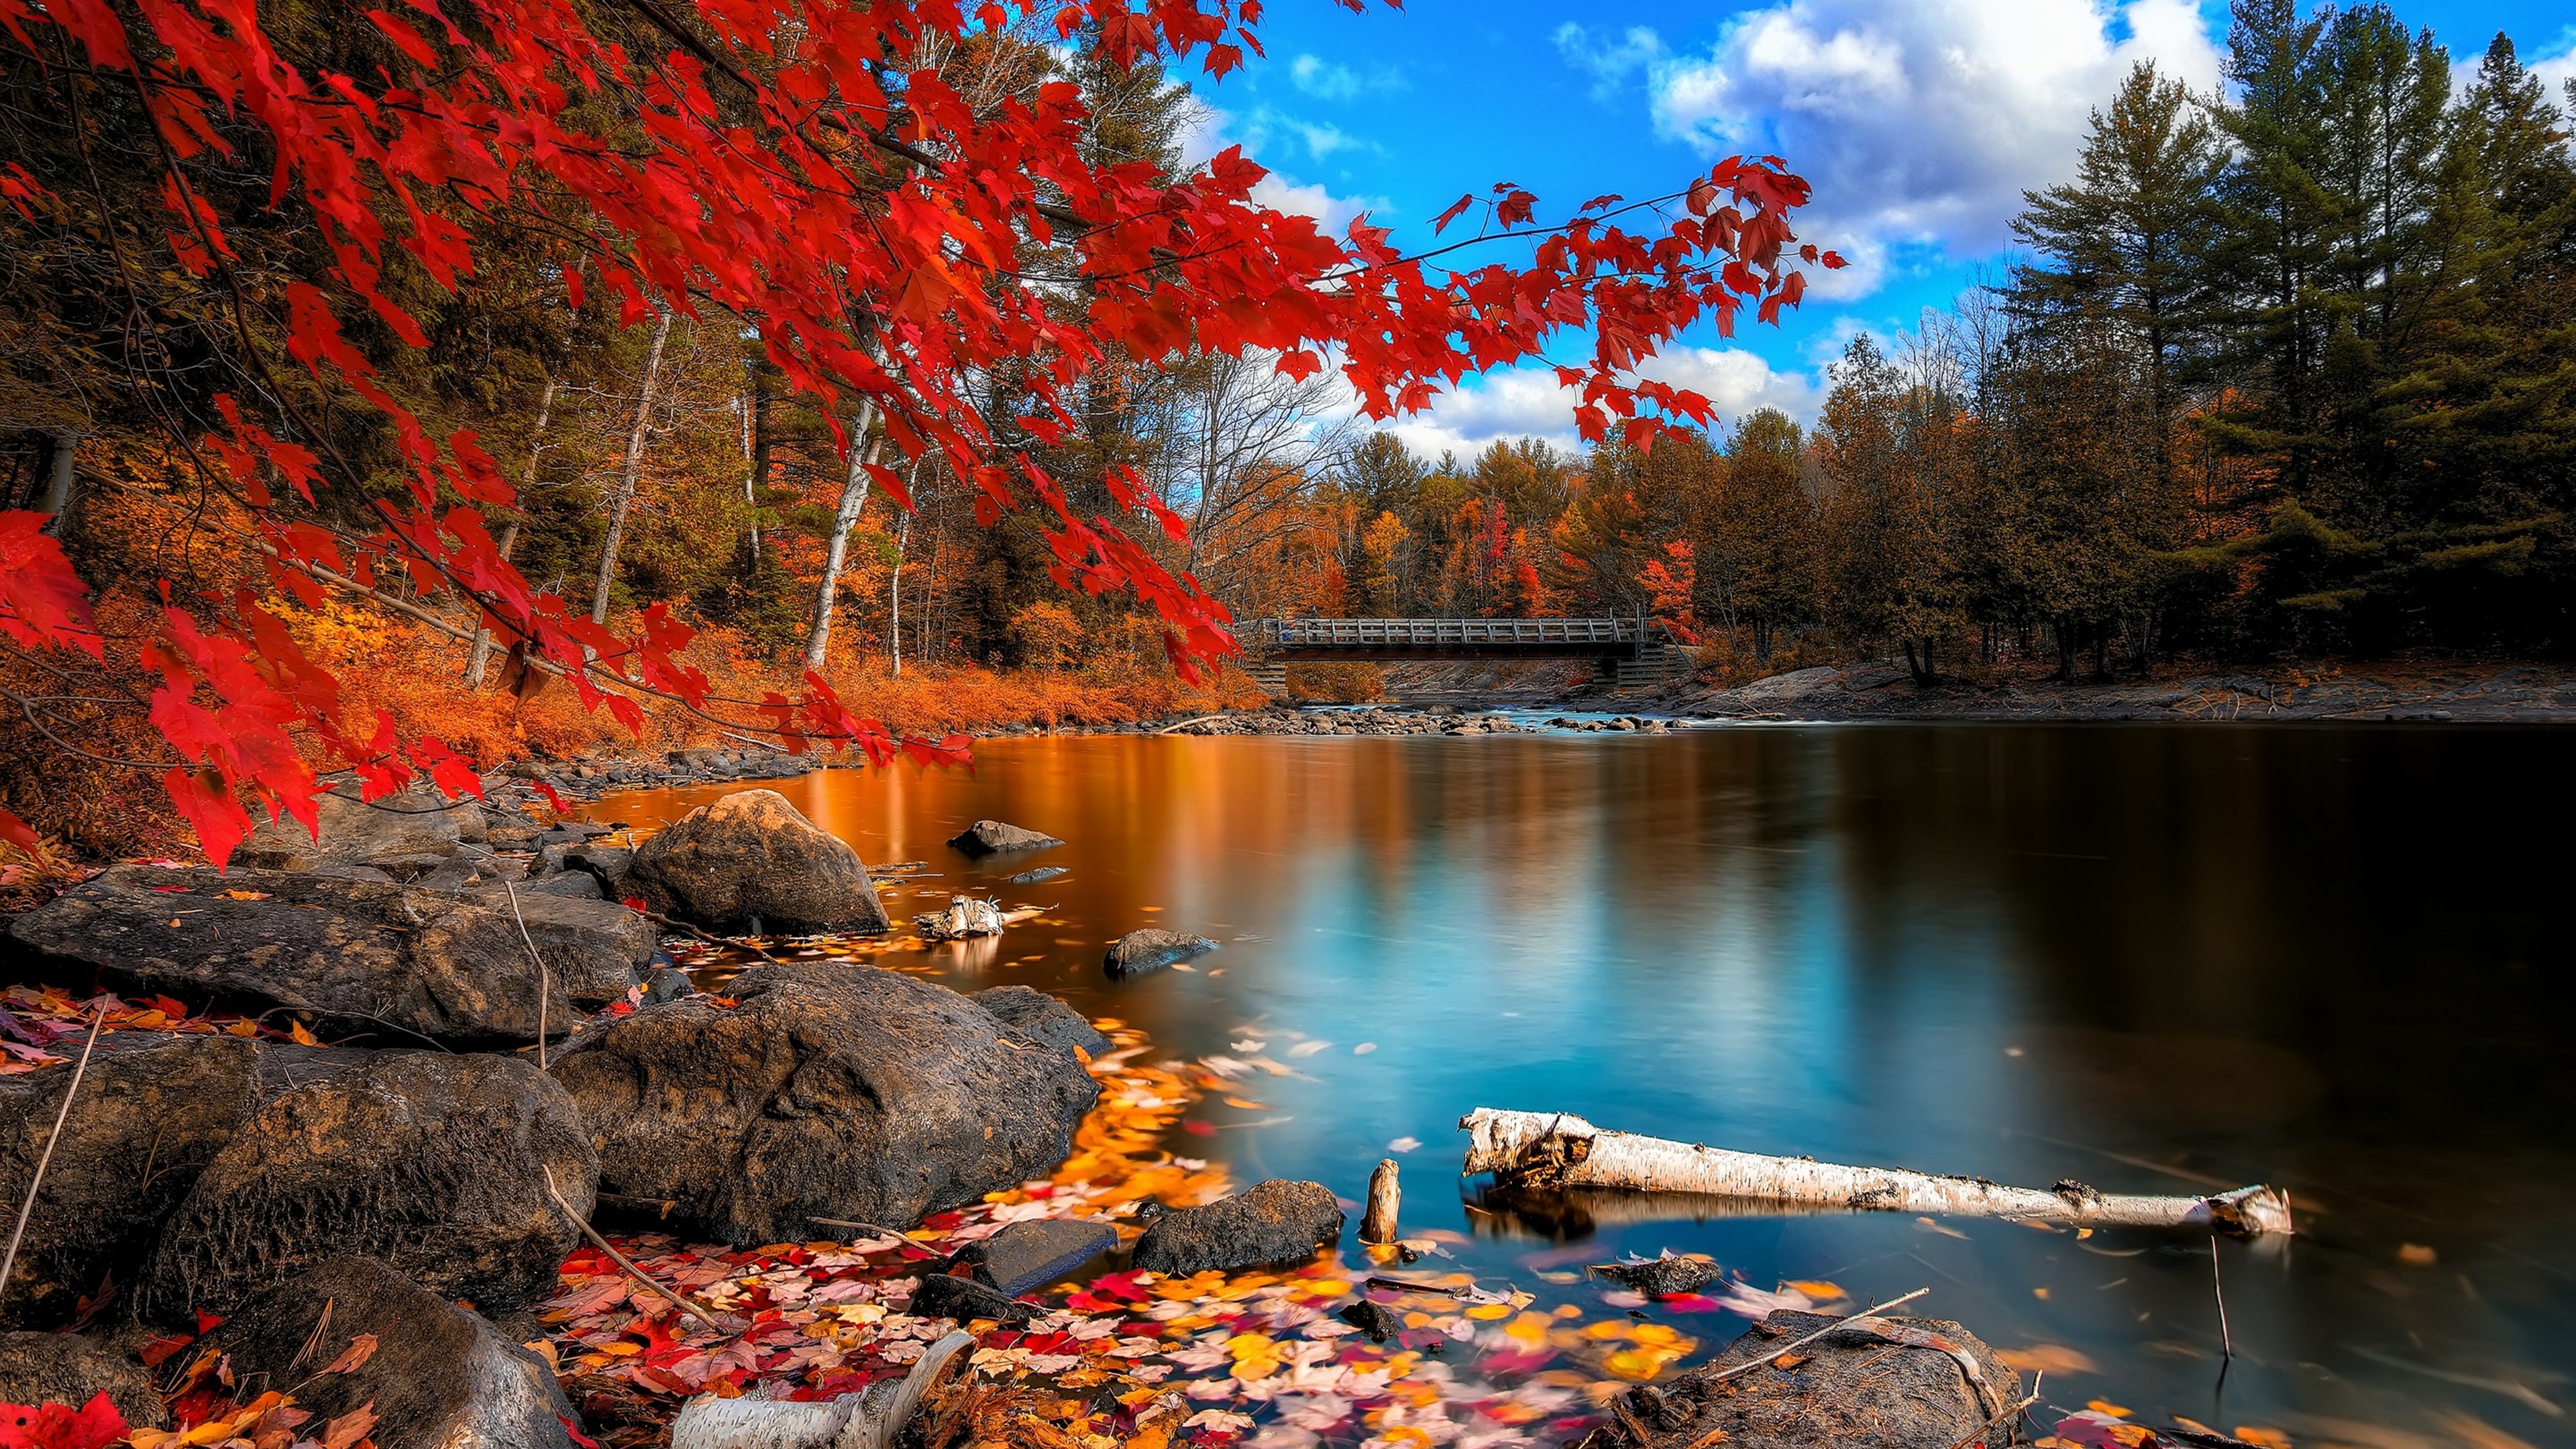 Fall Foliage Hd Nature 4k Wallpapers Images Backgrounds Photos And